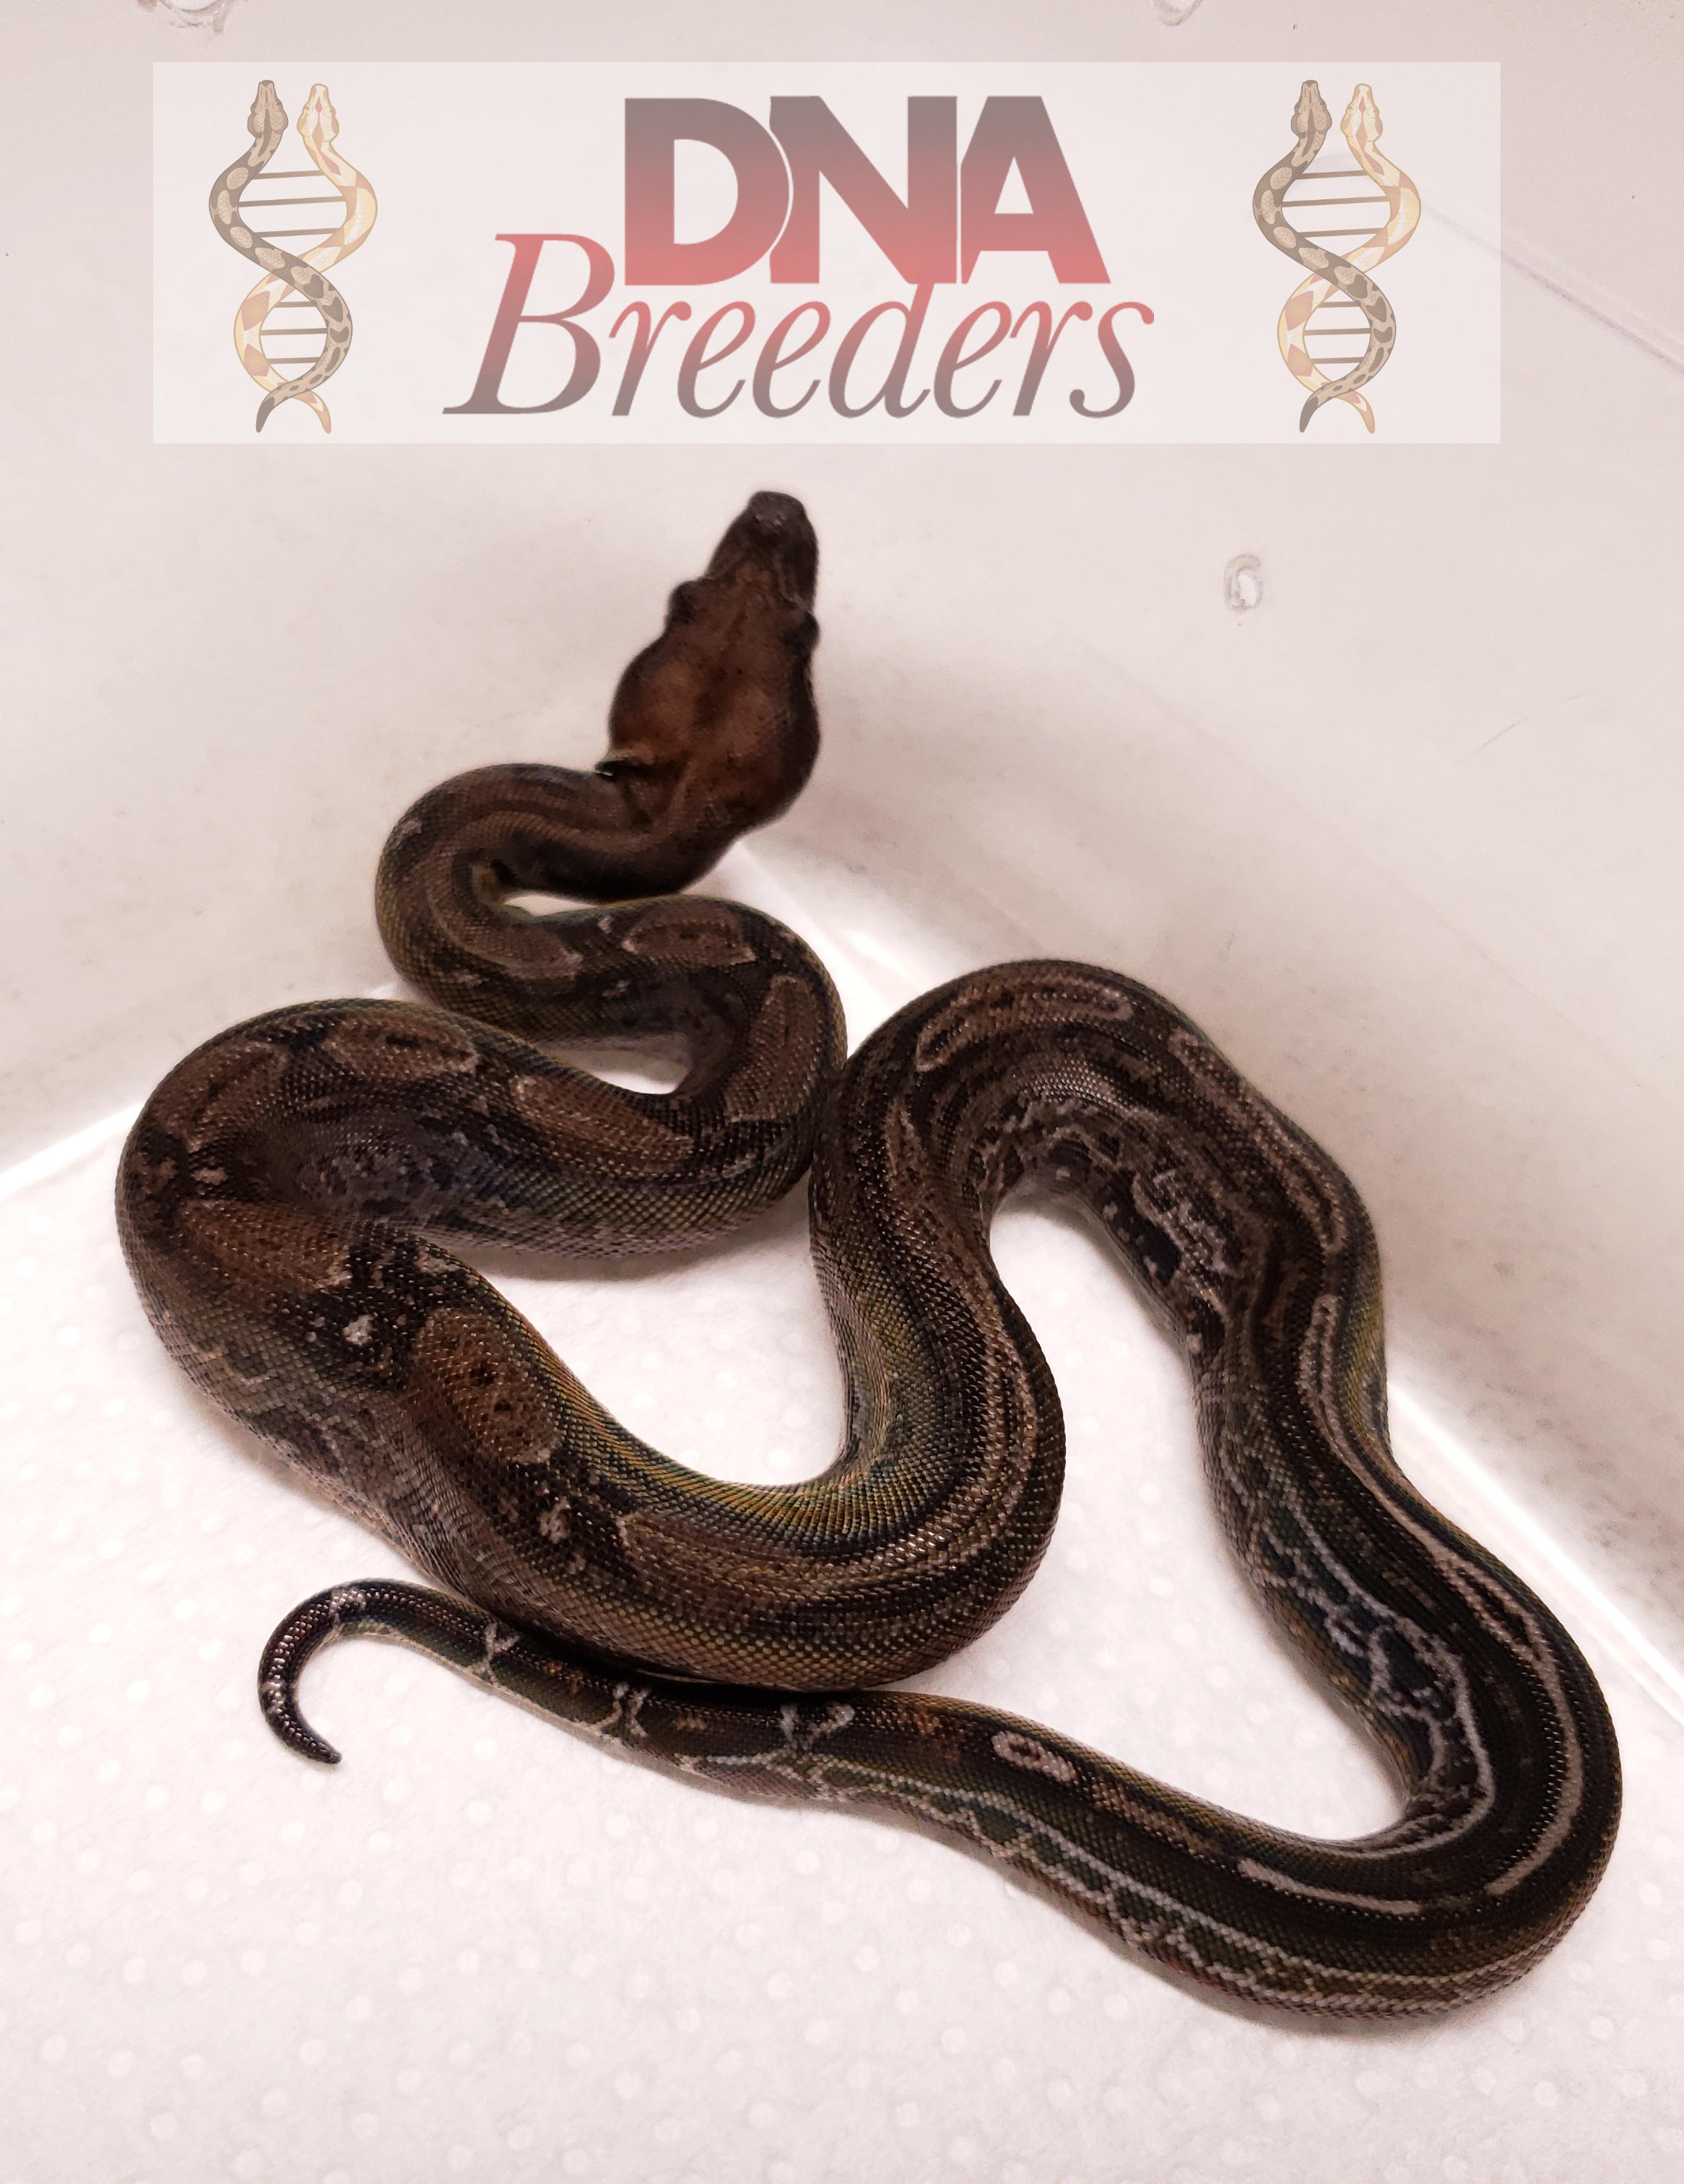 Leopard Boa Constrictor by DNA Breeders